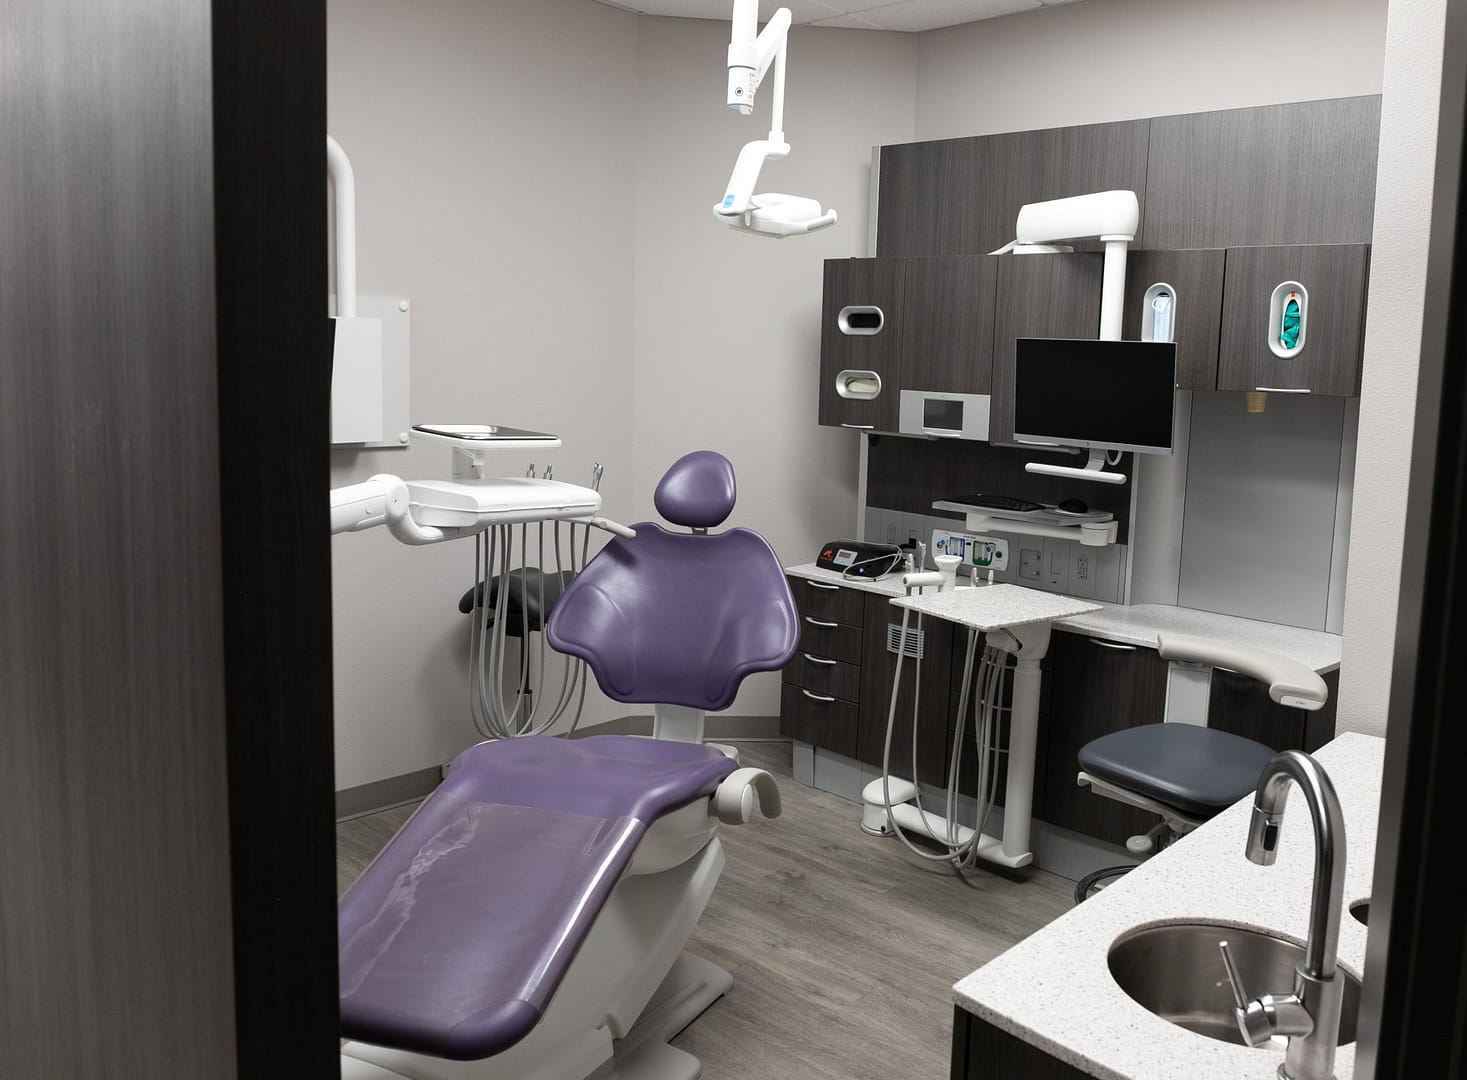 exam room with purple dental chair and gray cabinets